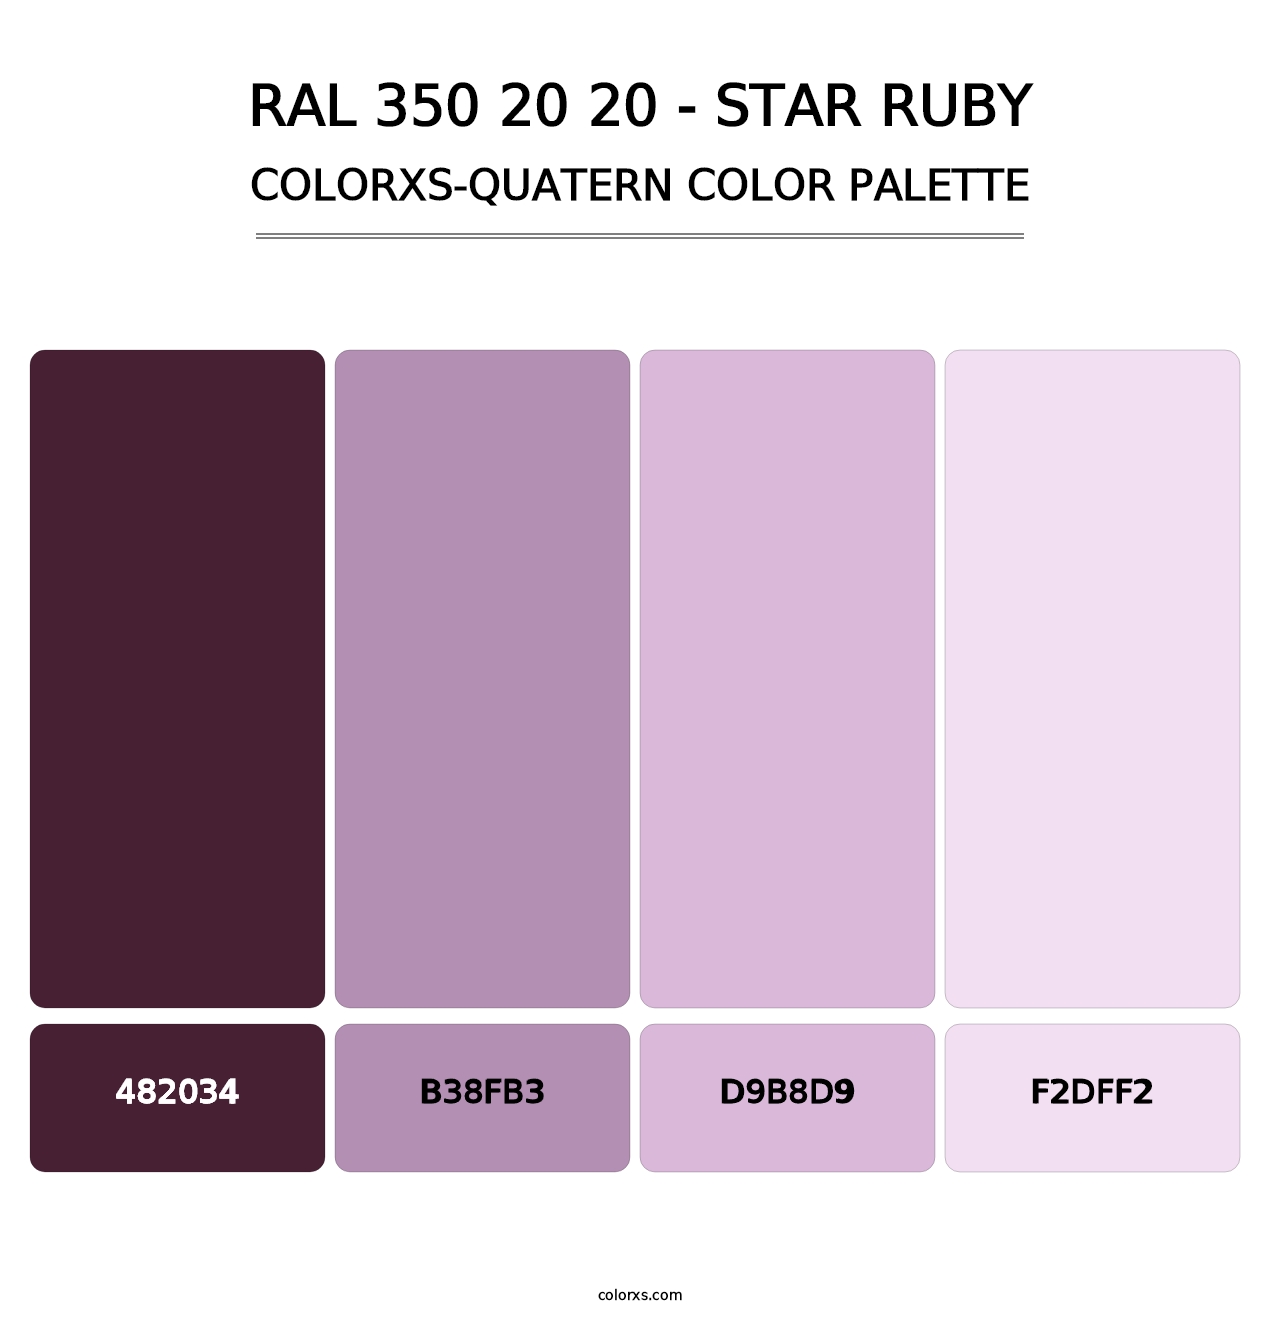 RAL 350 20 20 - Star Ruby - Colorxs Quatern Palette